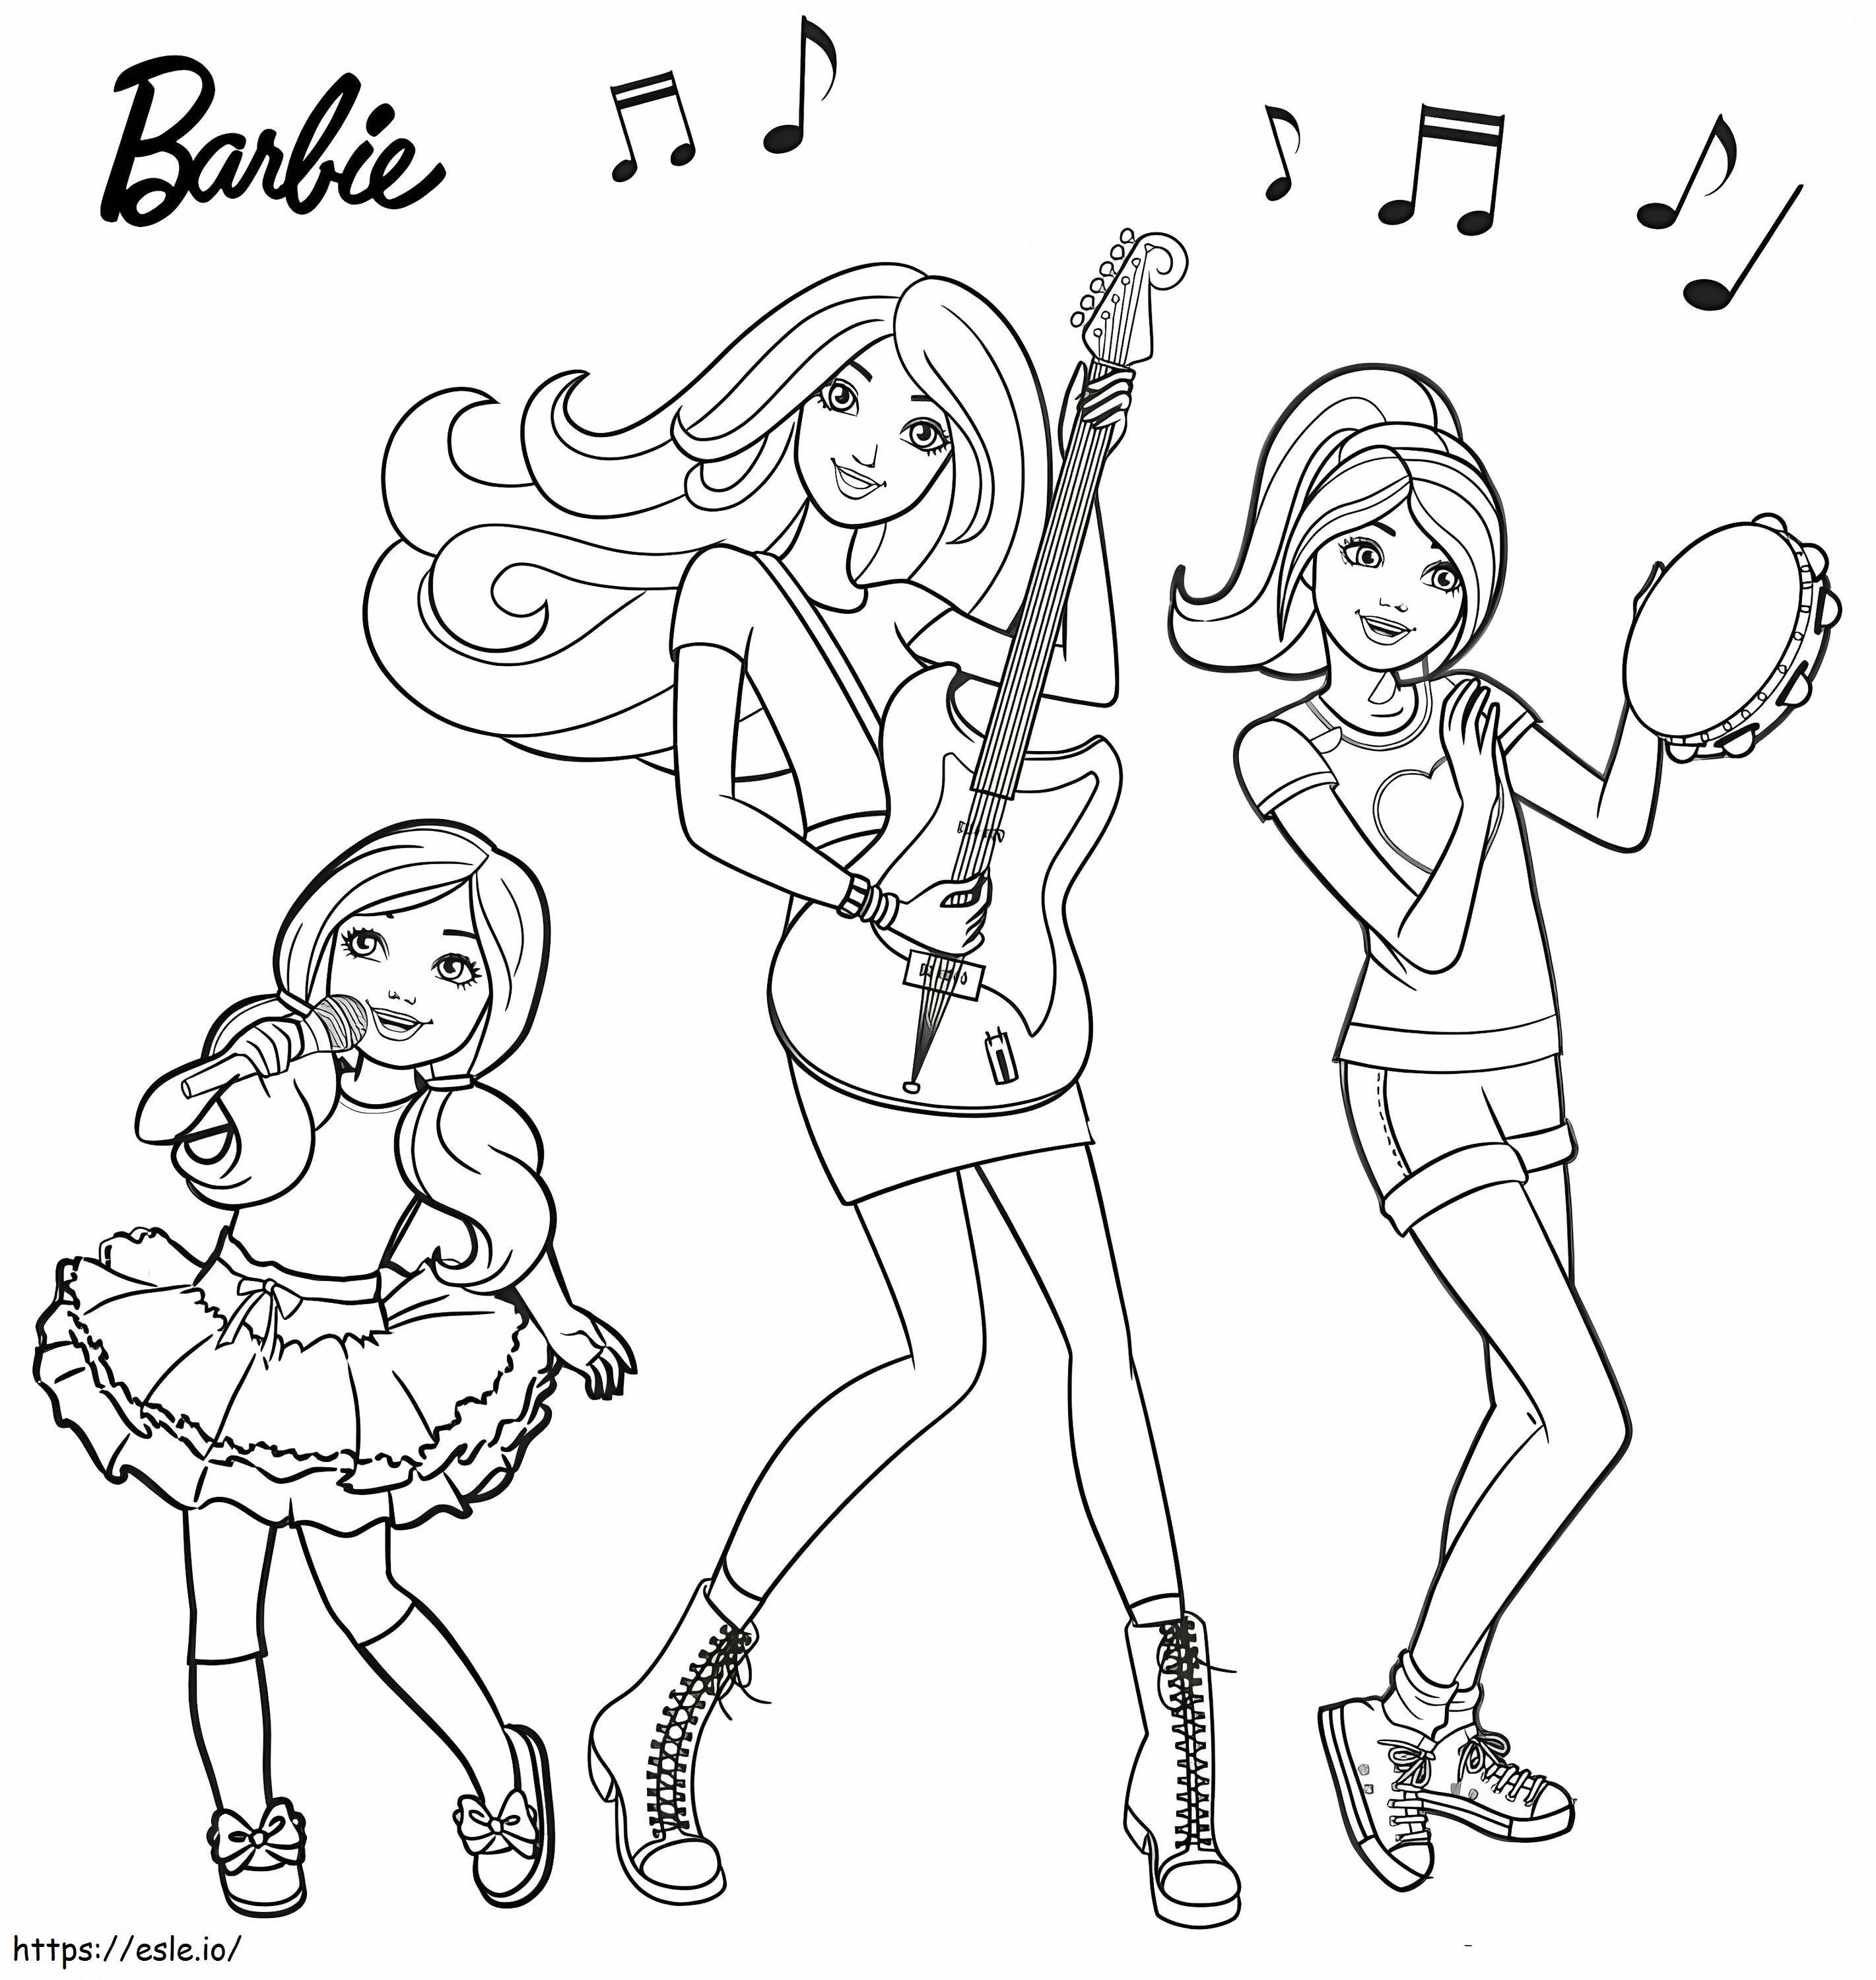 Barbie And Music Group coloring page